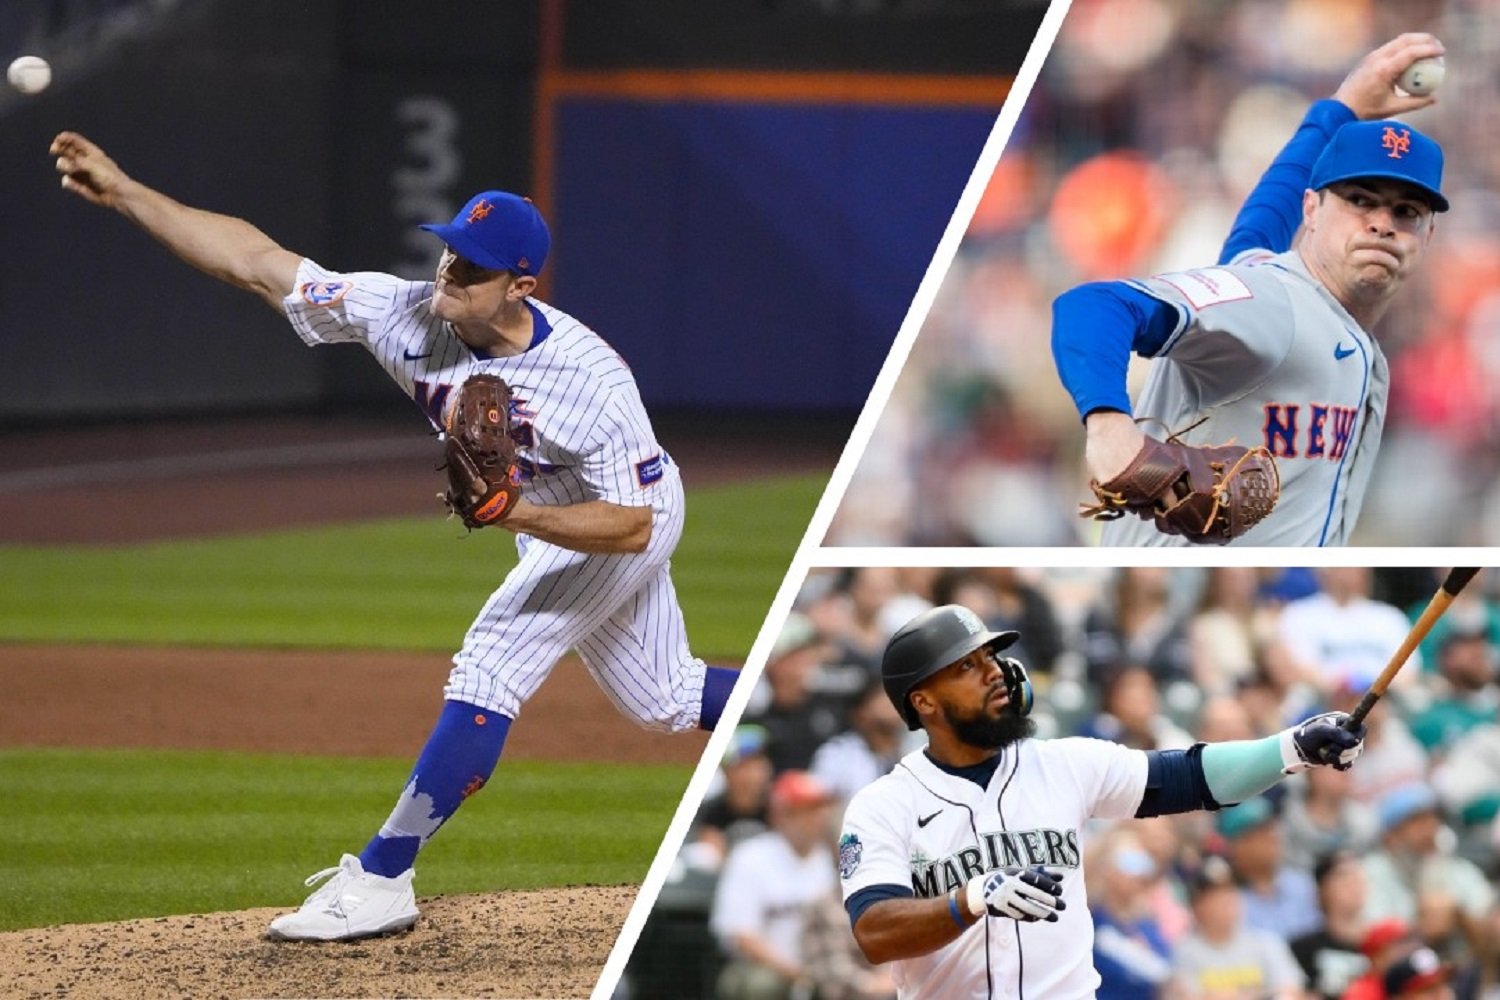 Mariners roster overview: They have a quantity of relief arms for the  bullpen, but will there be enough quality?